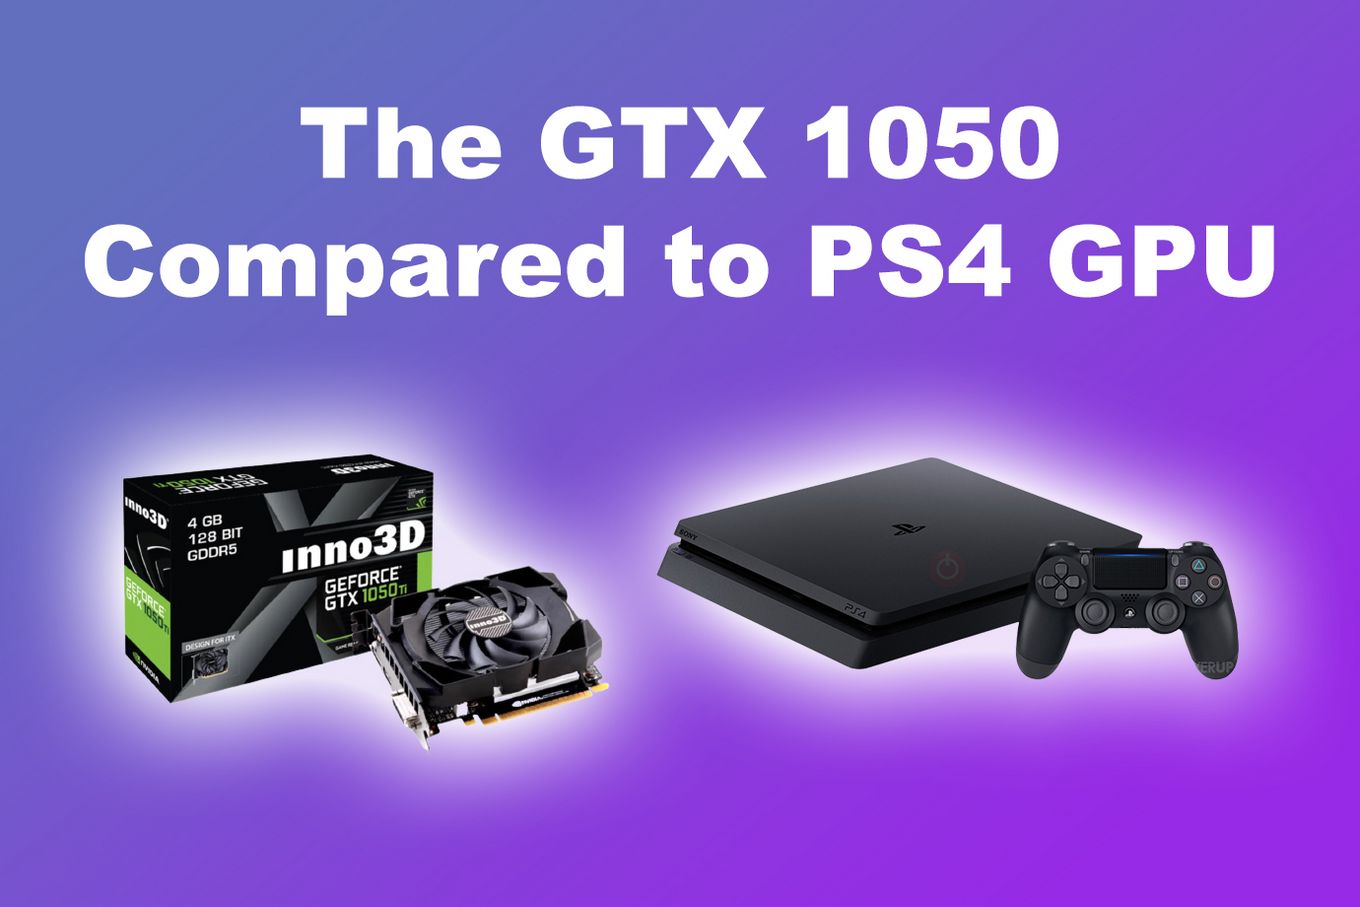 The GTX 1050 compared to PS4 GPU